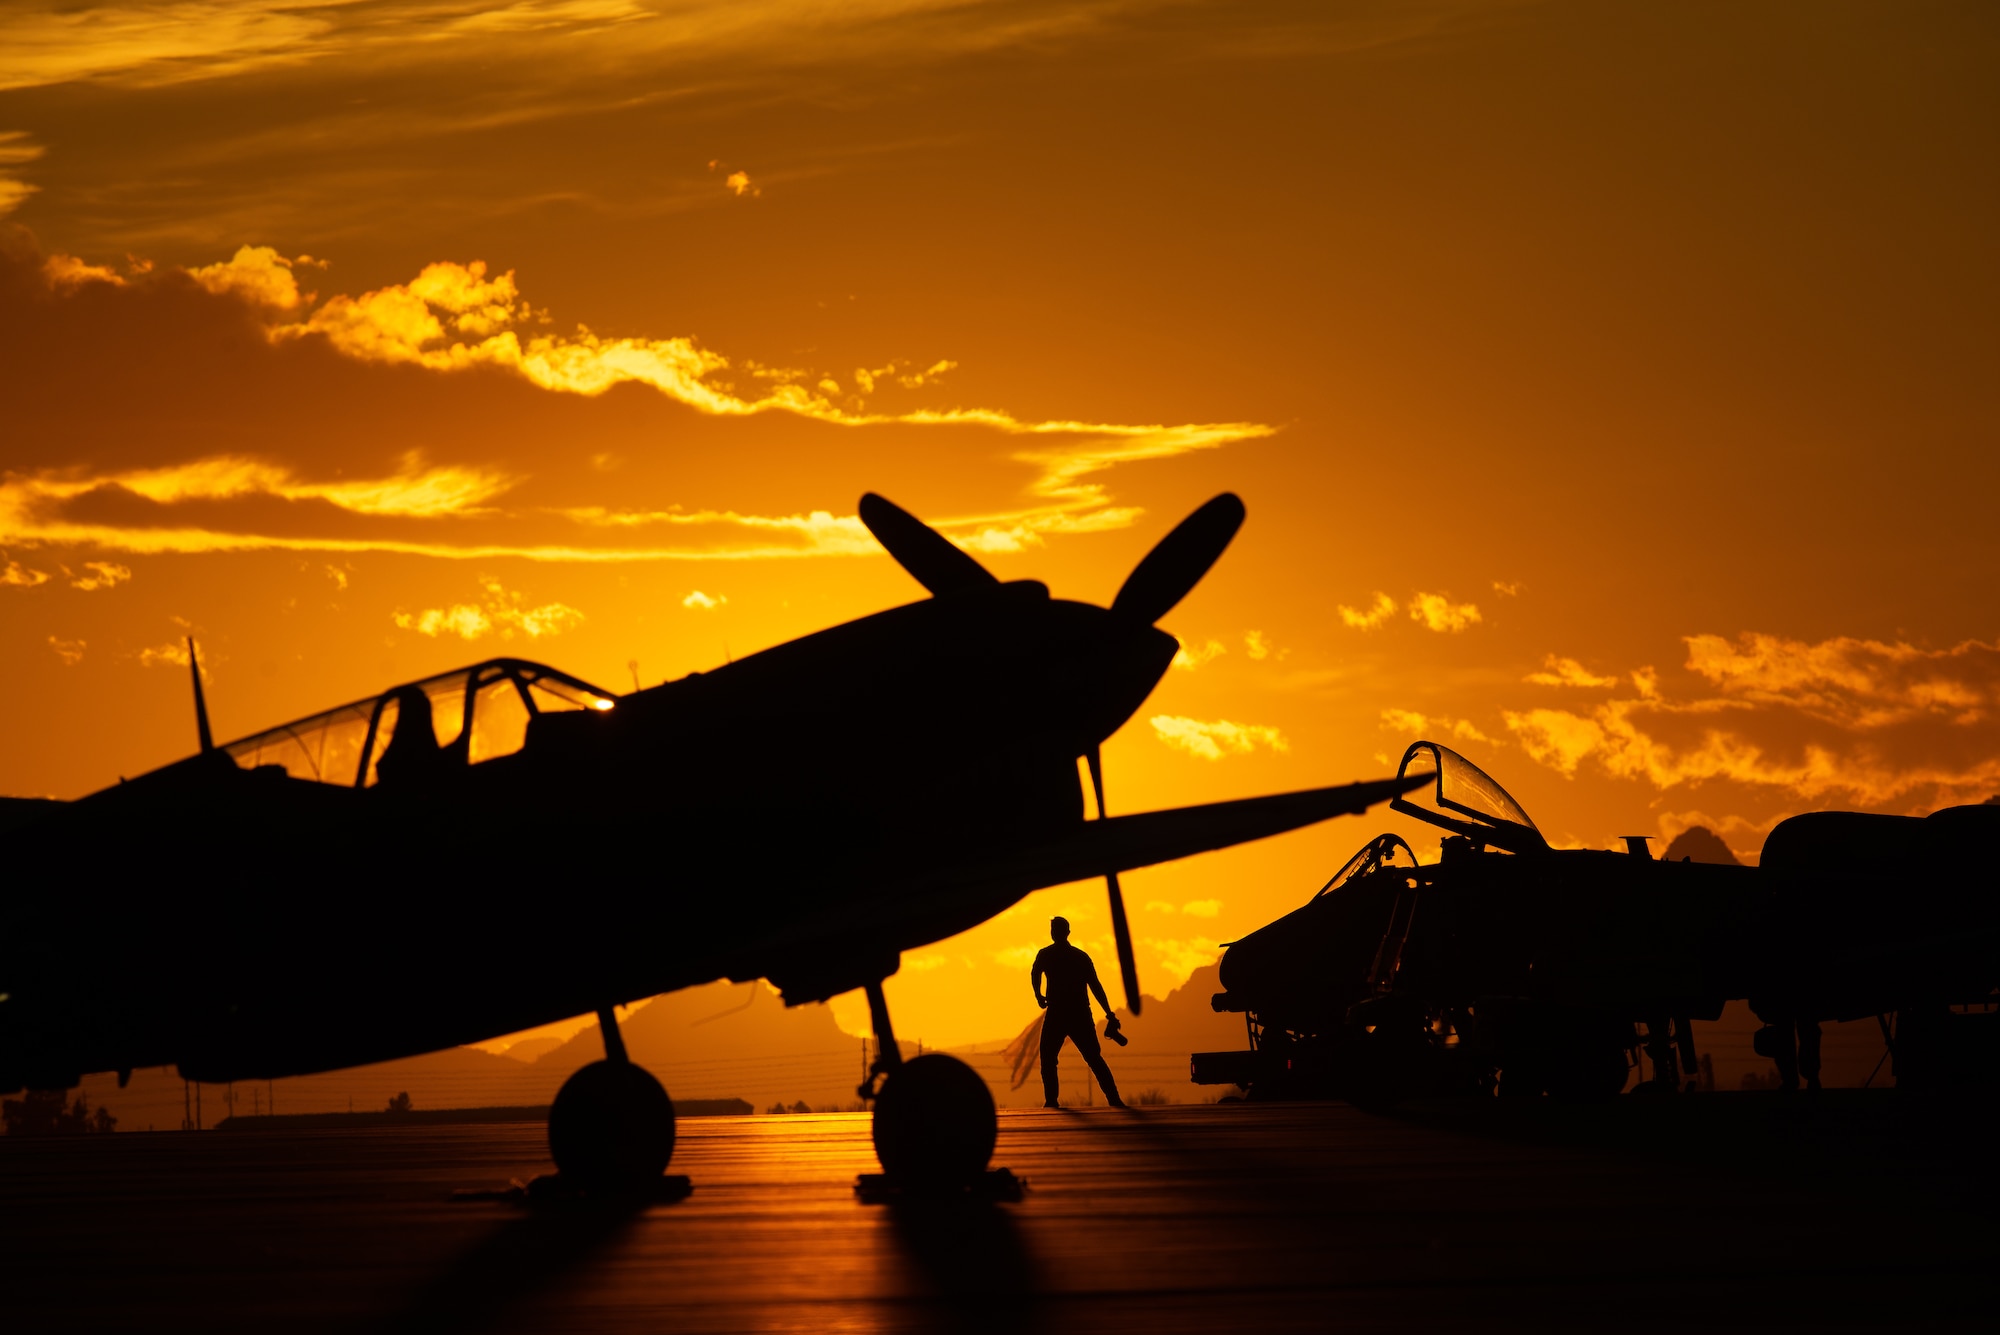 Sunset silhouette of planes on a flightline